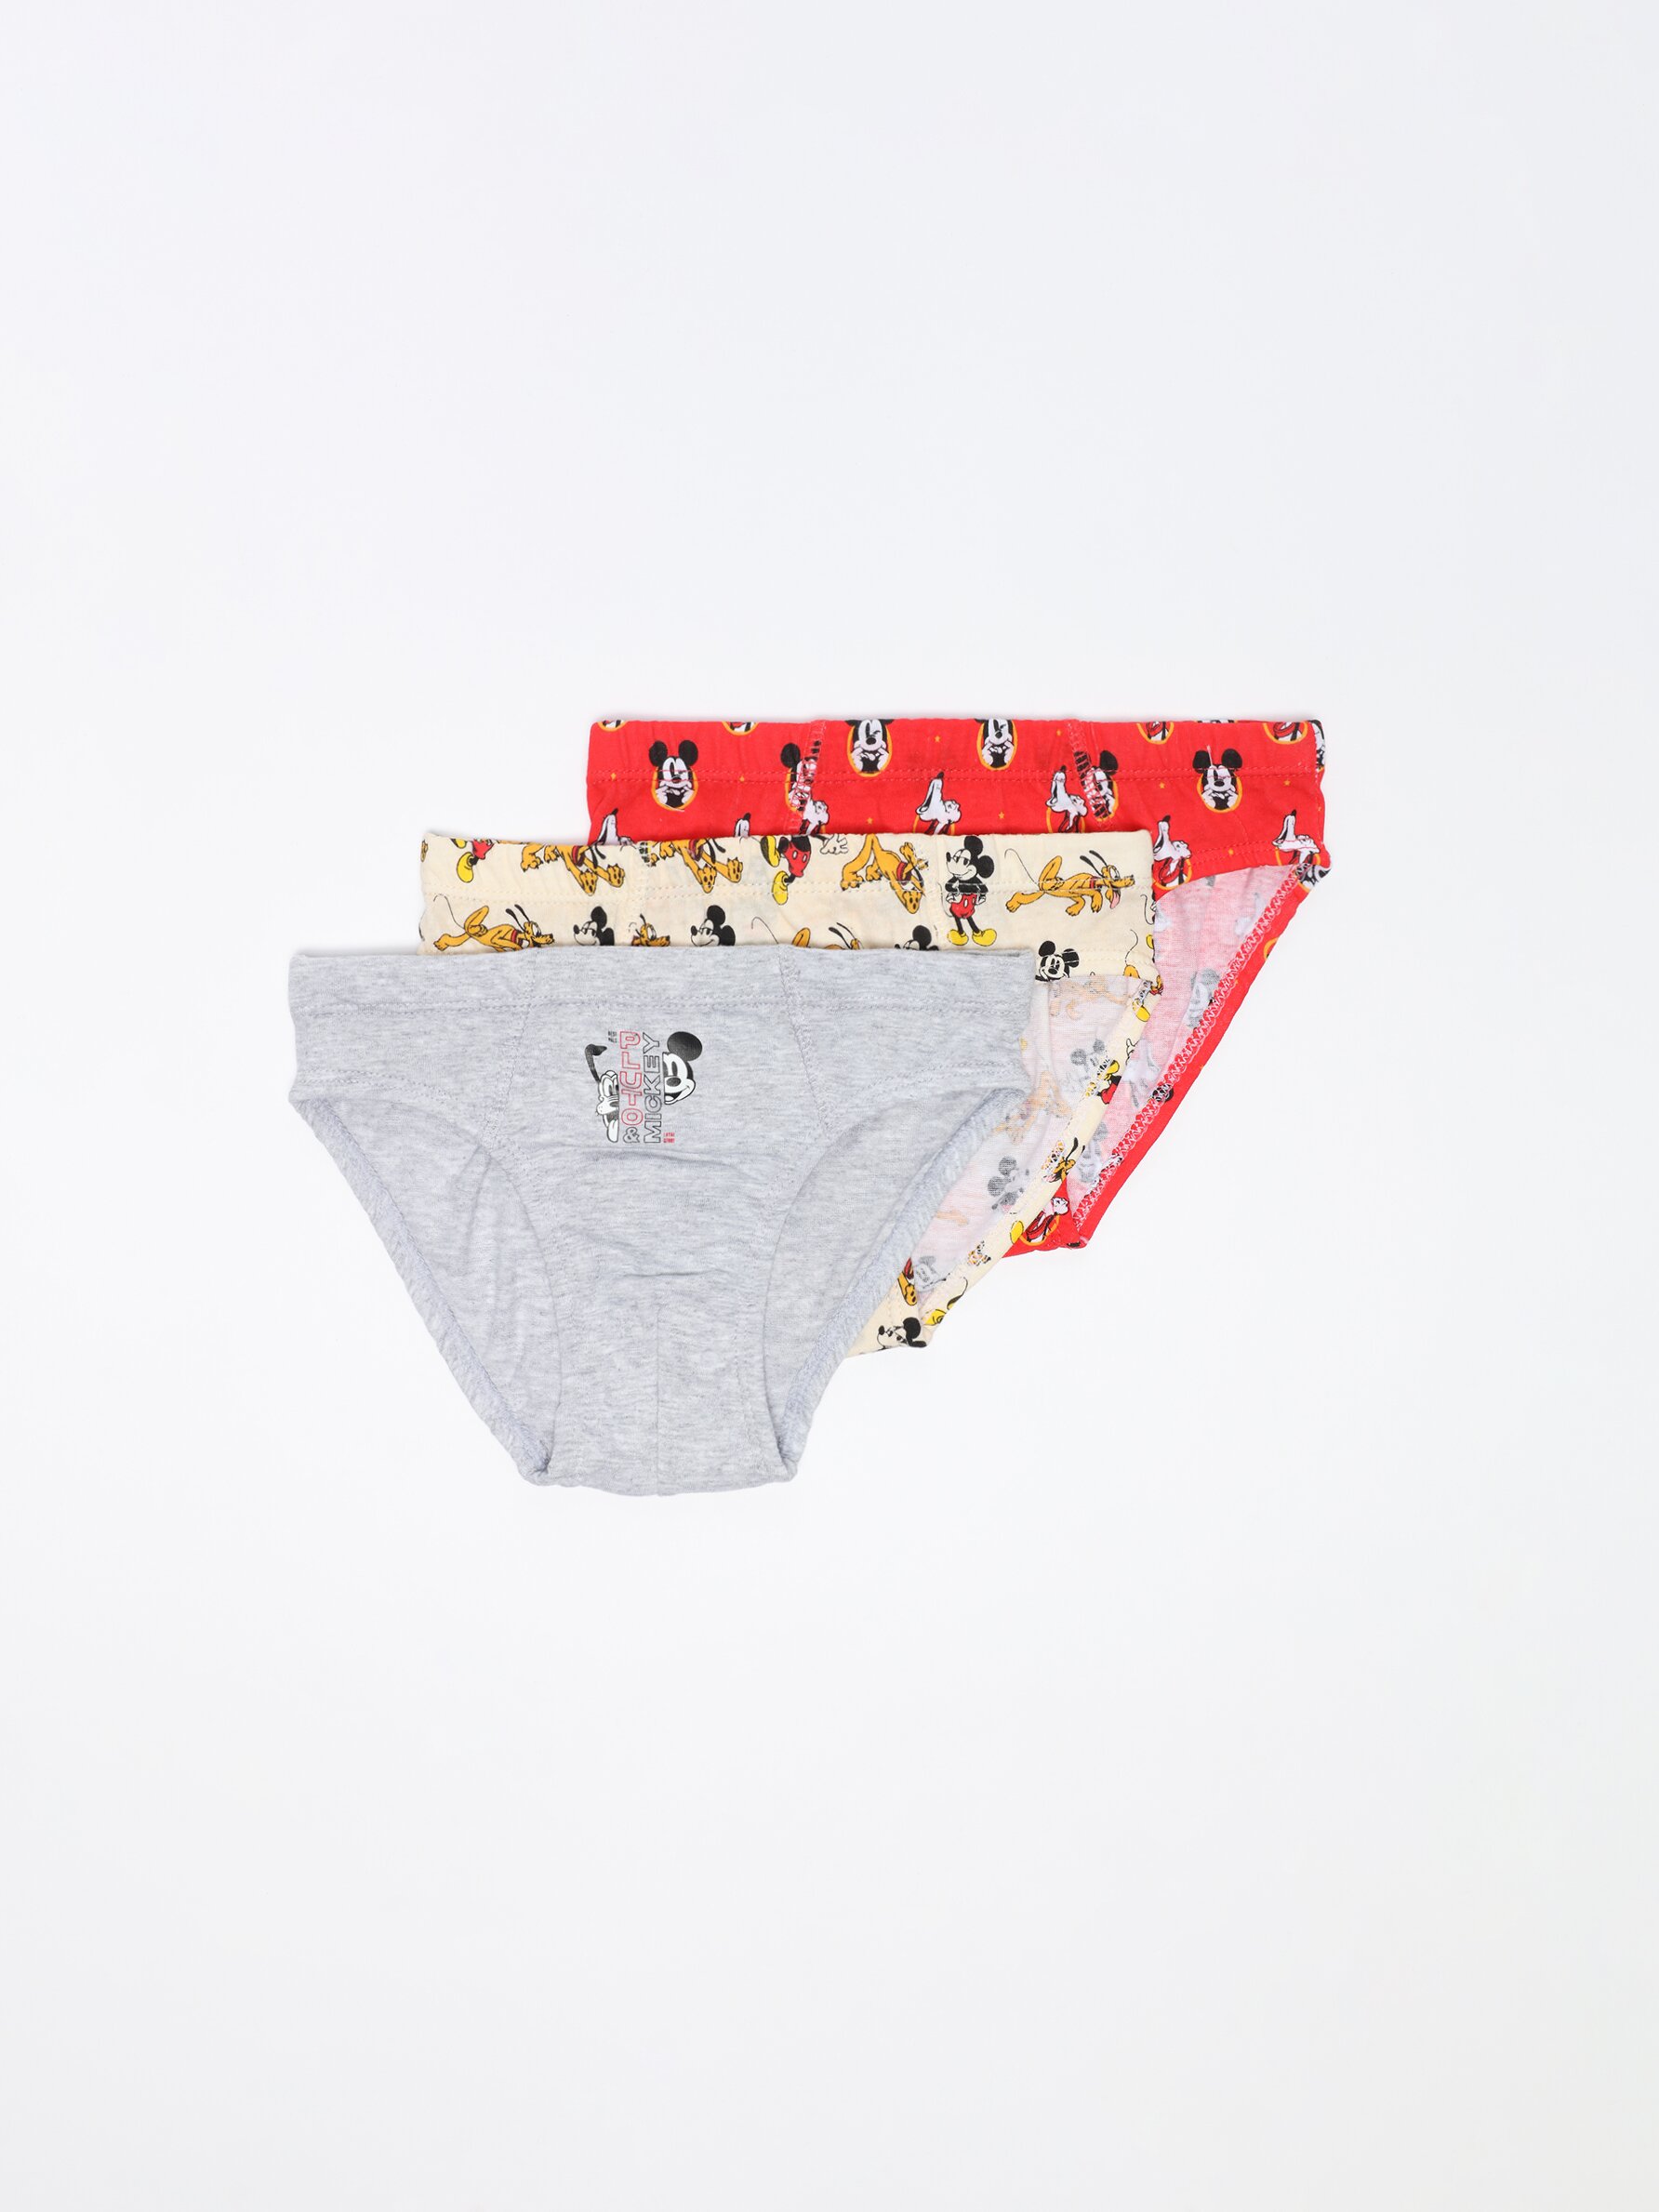 3-Pack of Mickey ©Disney briefs - Collabs - CLOTHING - Boy - Kids